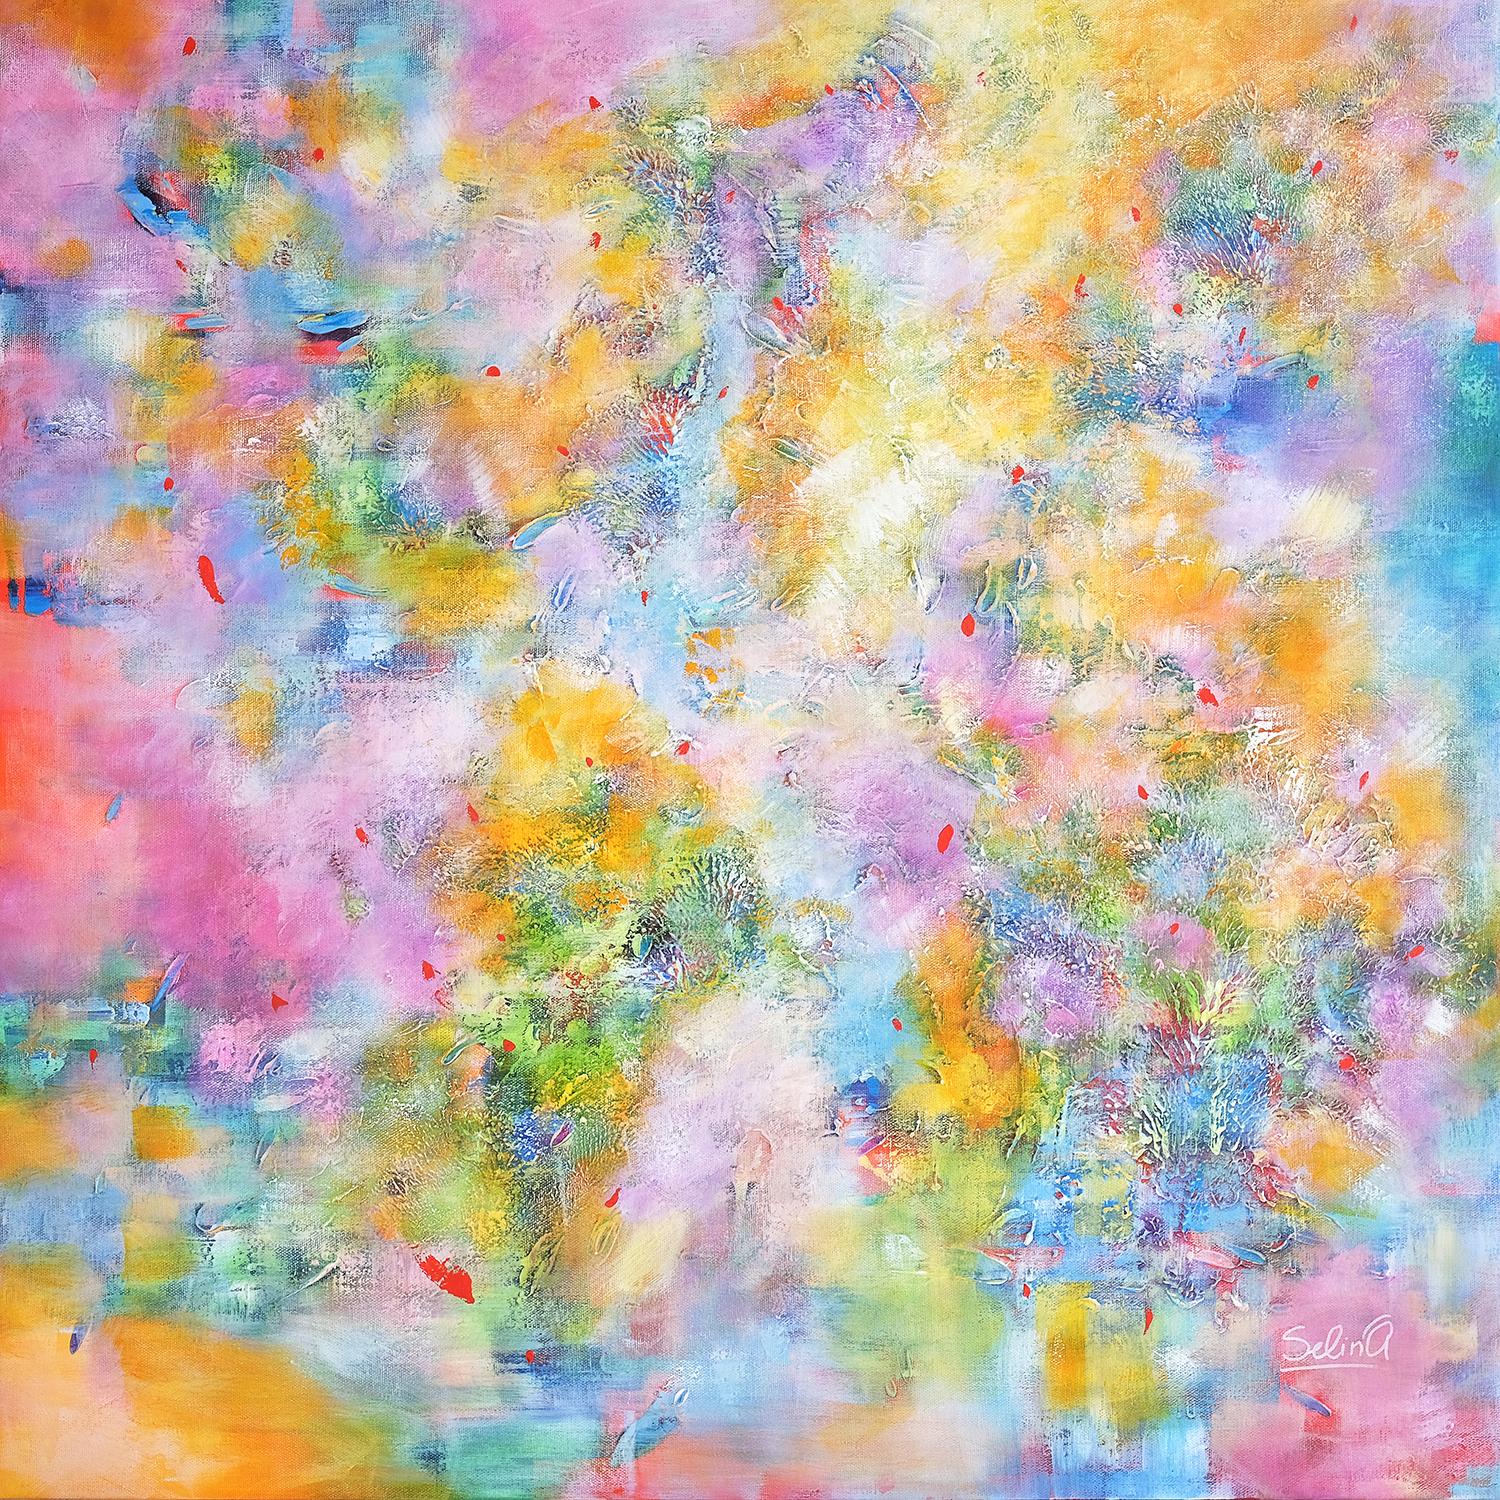 The light, Modern Colorful Abstract Painting 100x100cm by Anna Selina